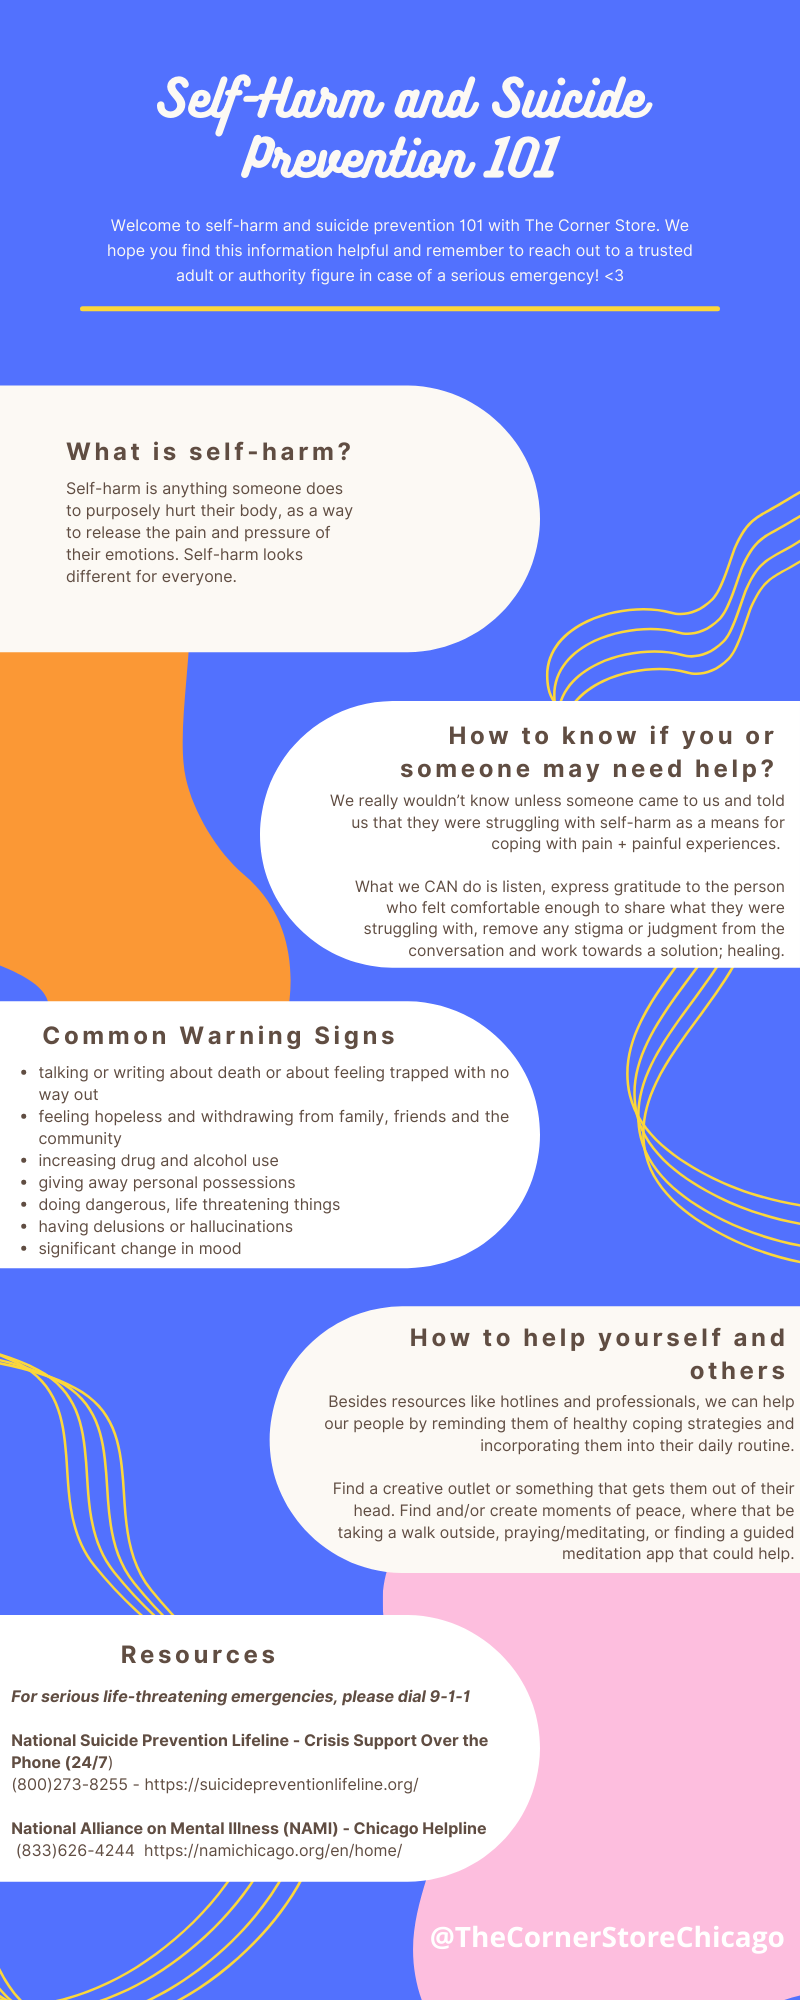 TCSC - Self-Harm and Suicide Prevention 101 Infographic.png